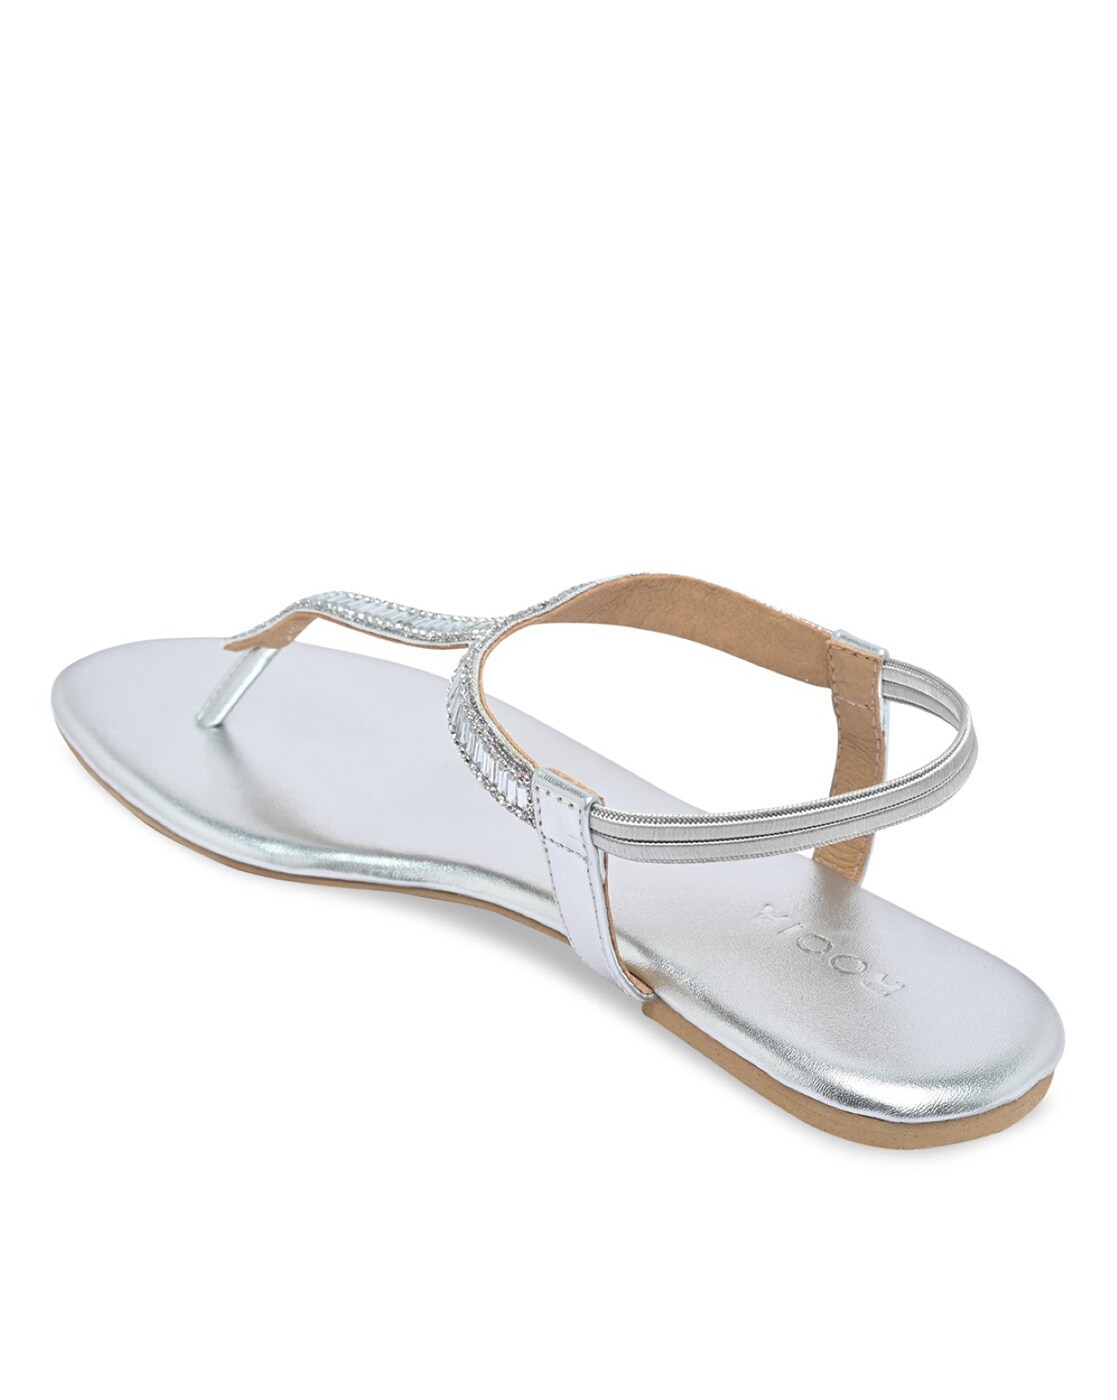 Buy Ventutto Rio Blue Silver Crystal Cluster T-Strap Sandal for womens,  Blue Silver, 9 at Amazon.in